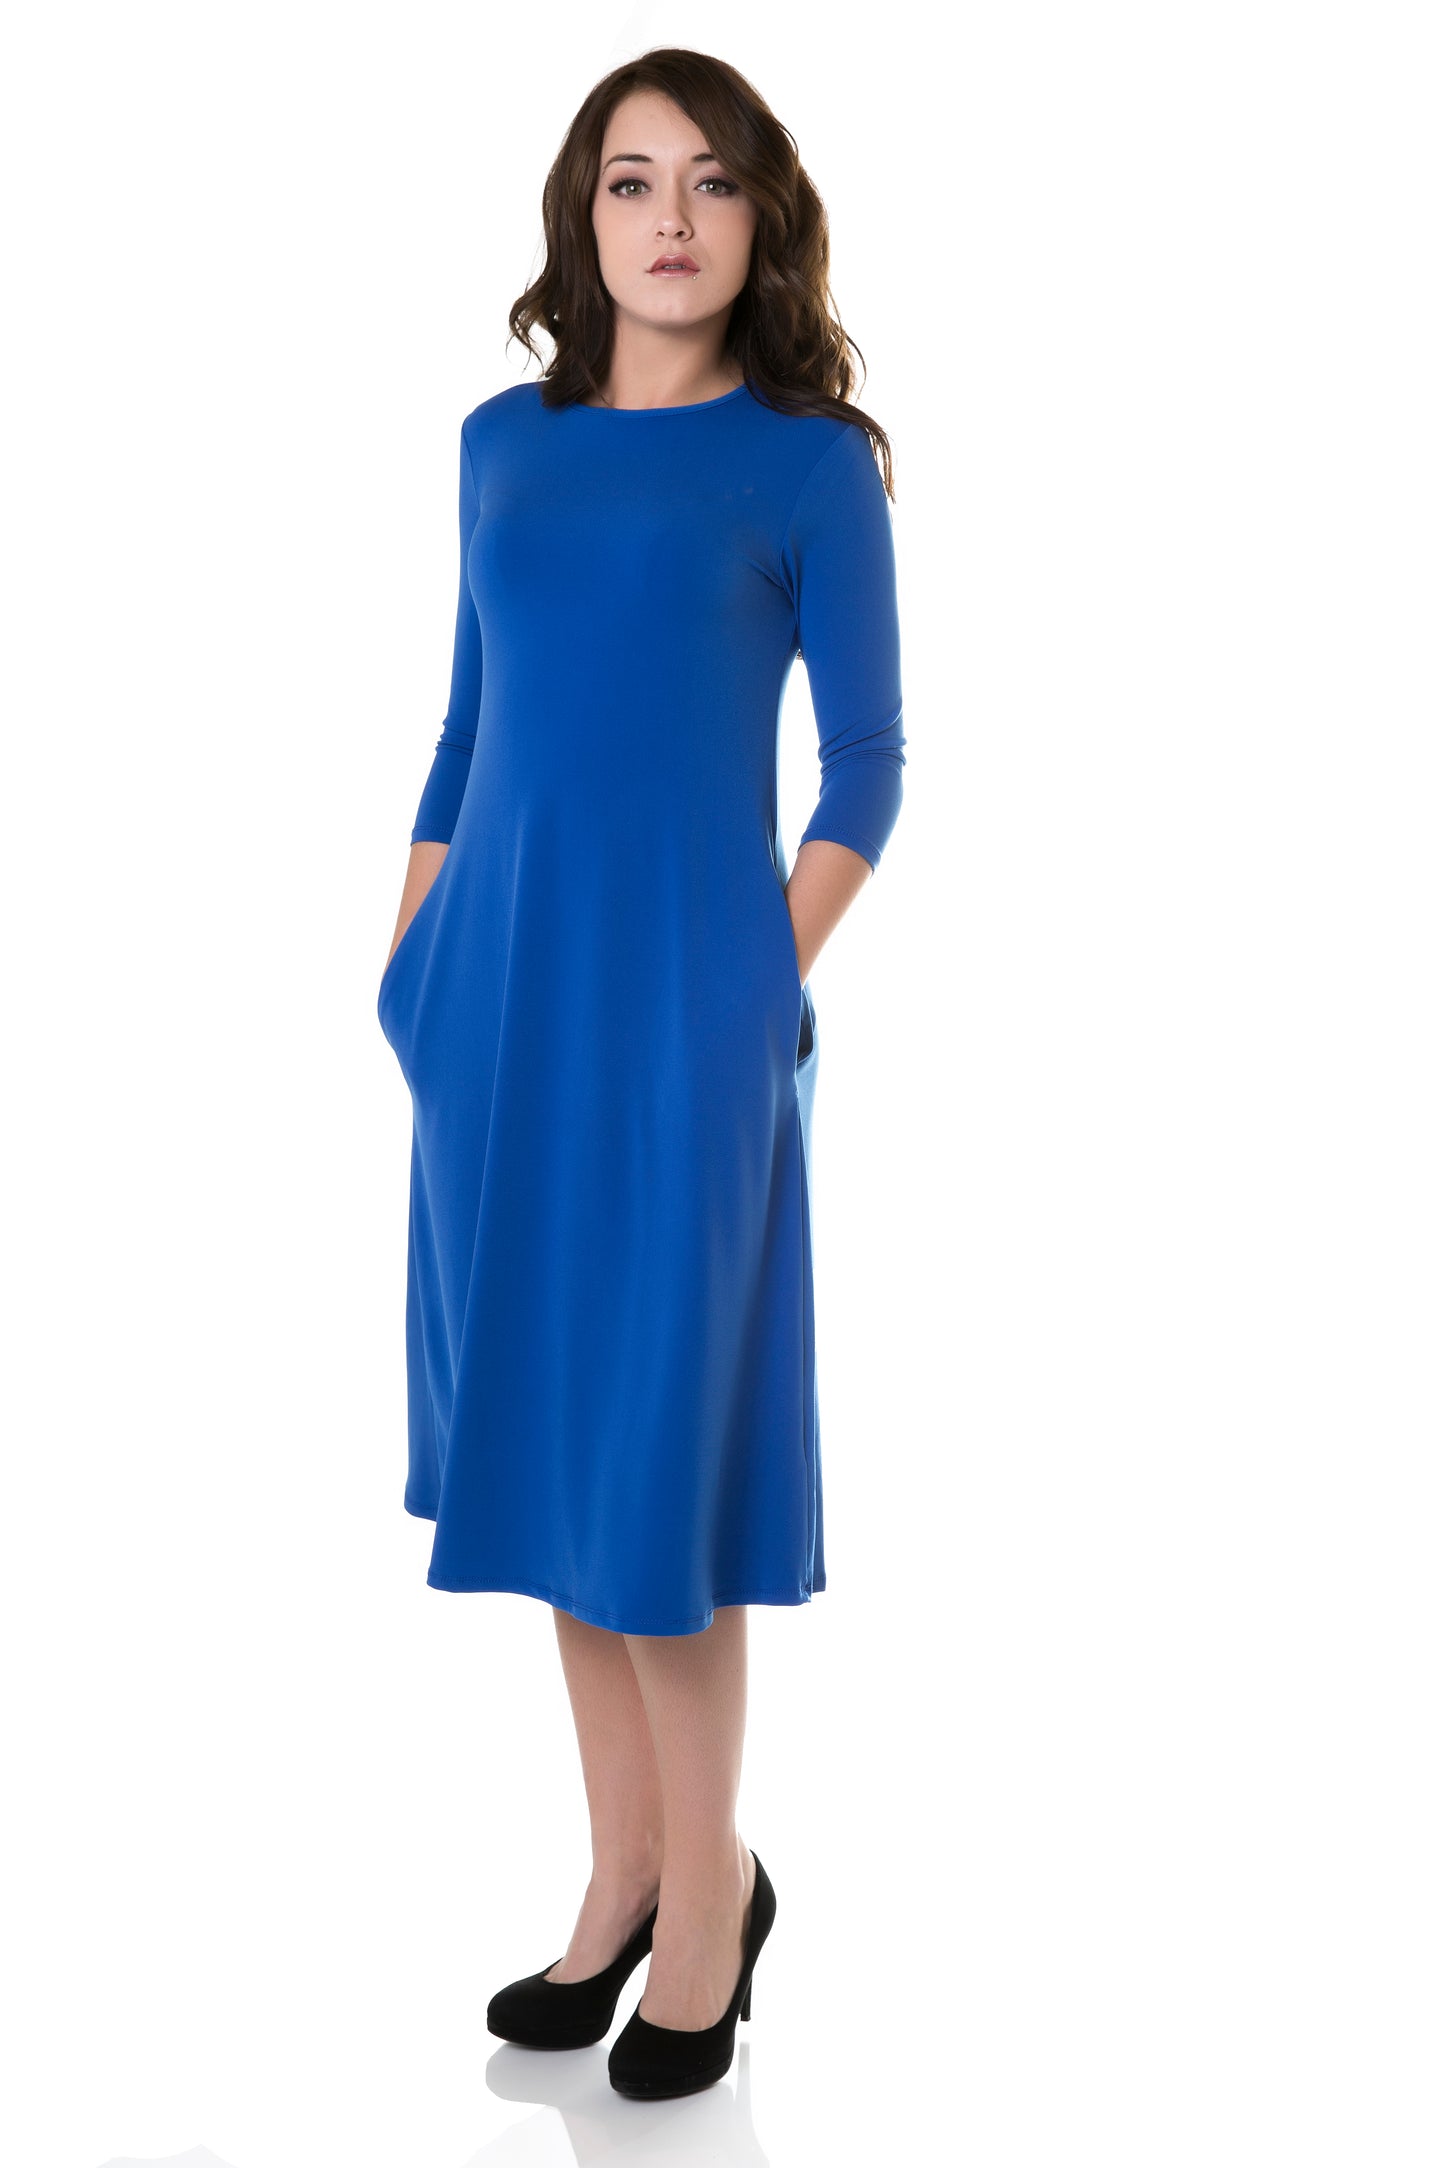 Esteez TAMMEE Dress - Womens Classic Fit and Flare Dress with pockets - COBALT